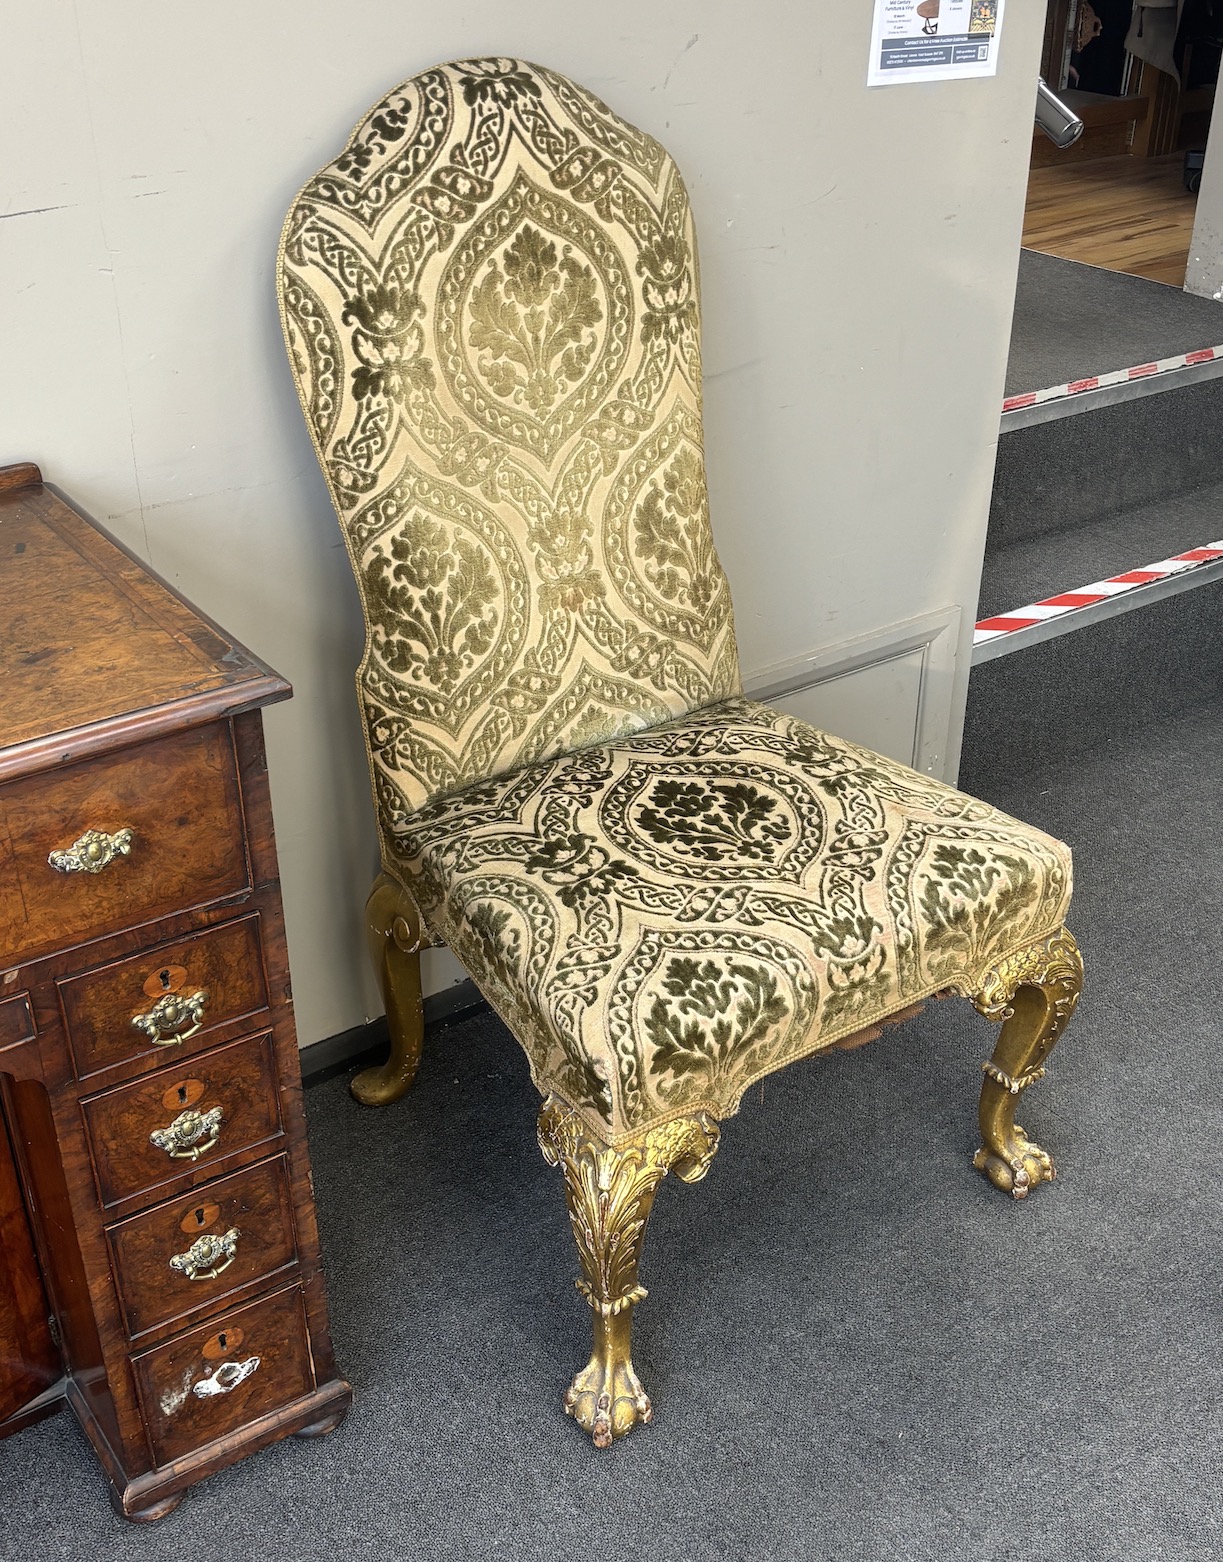 A pair of George II style giltwood side chairs, velvet brocade fabric, width 64cm, depth 64cm, height 114cm